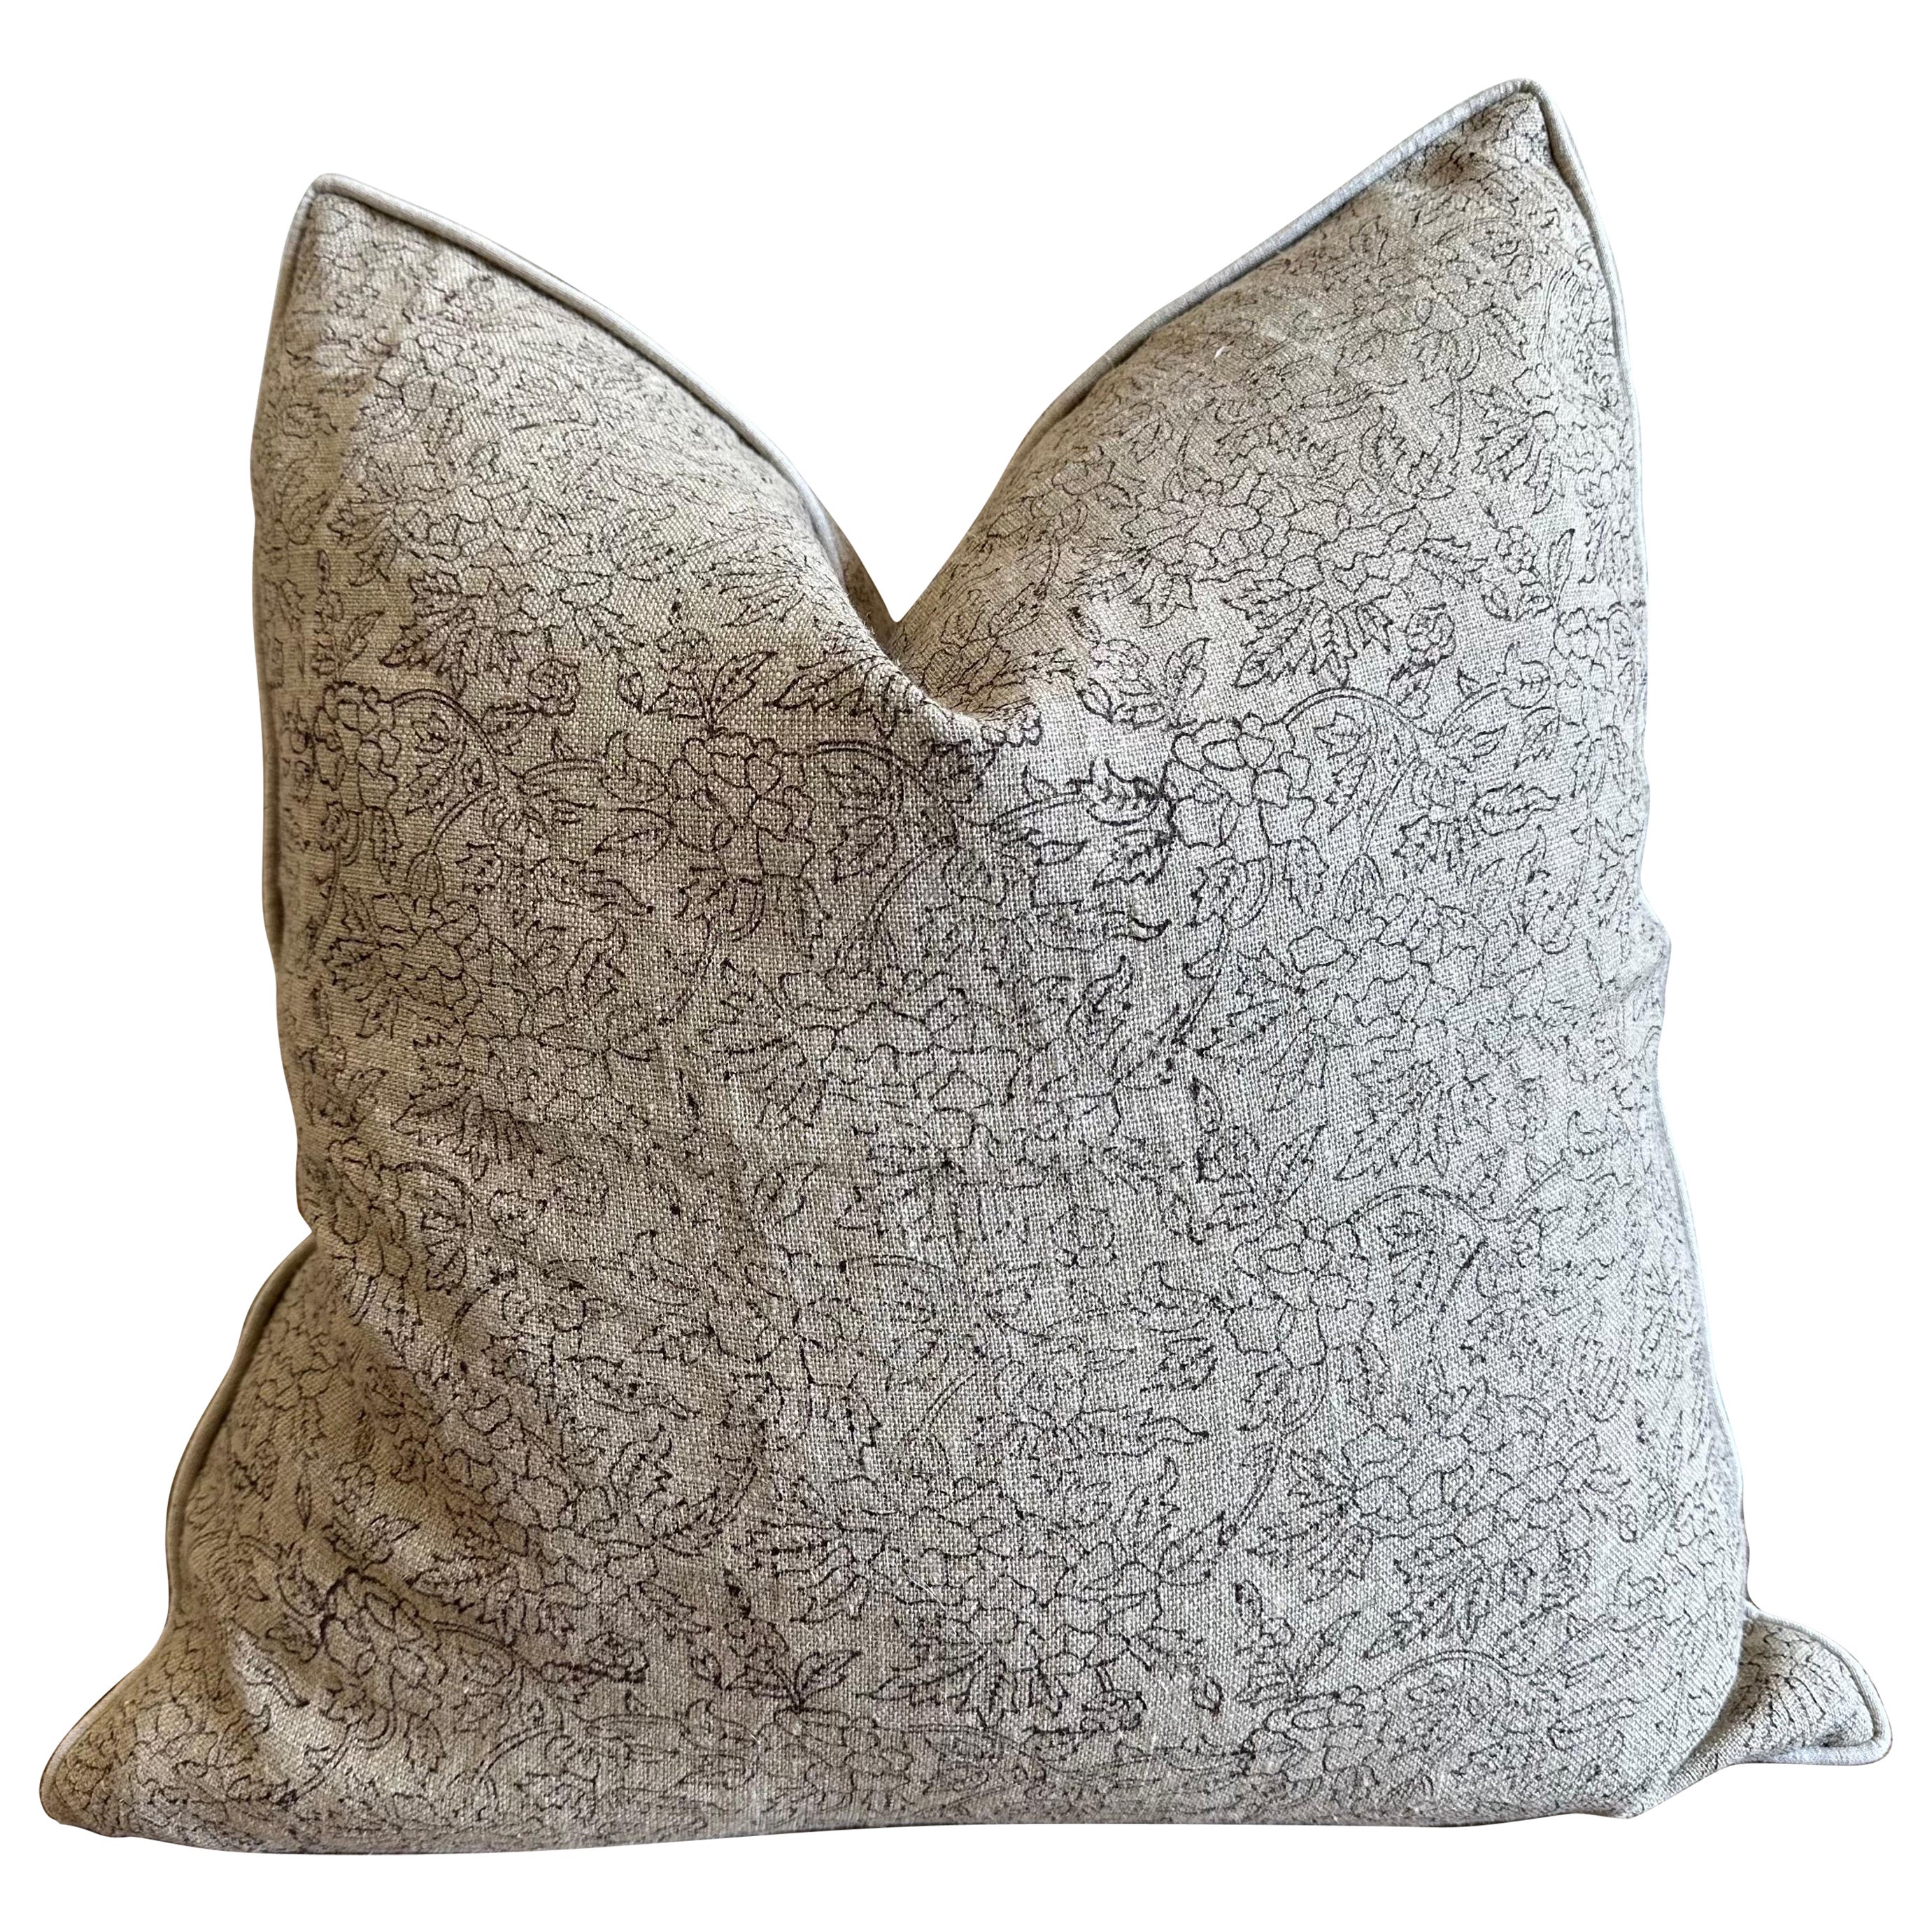 Marceline Coco Block Printed Linen Pillow with Down Feather Insert